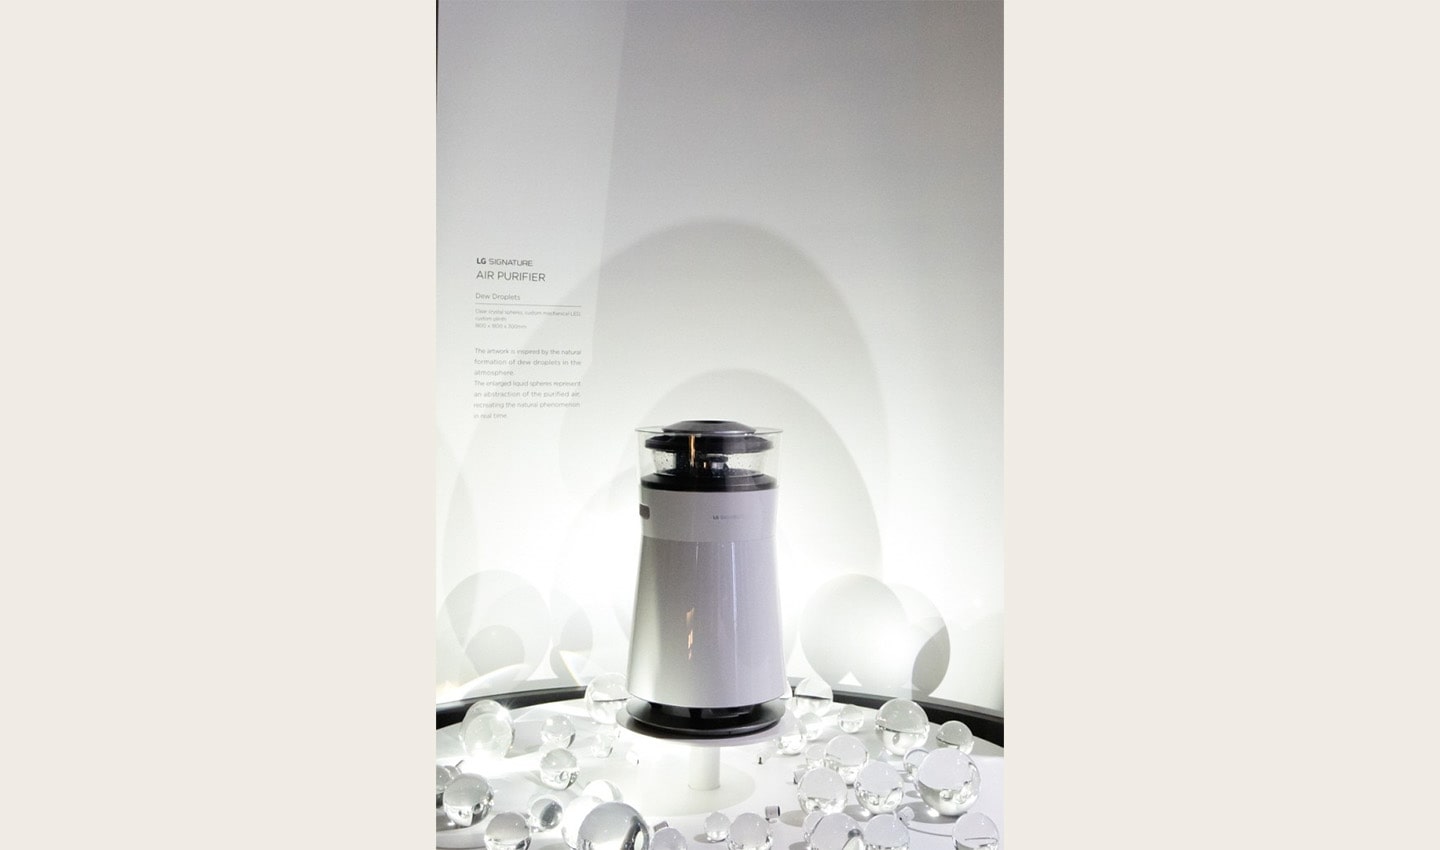 Front view of the LG SIGNATURE Air Purifier in front of the information display about the product